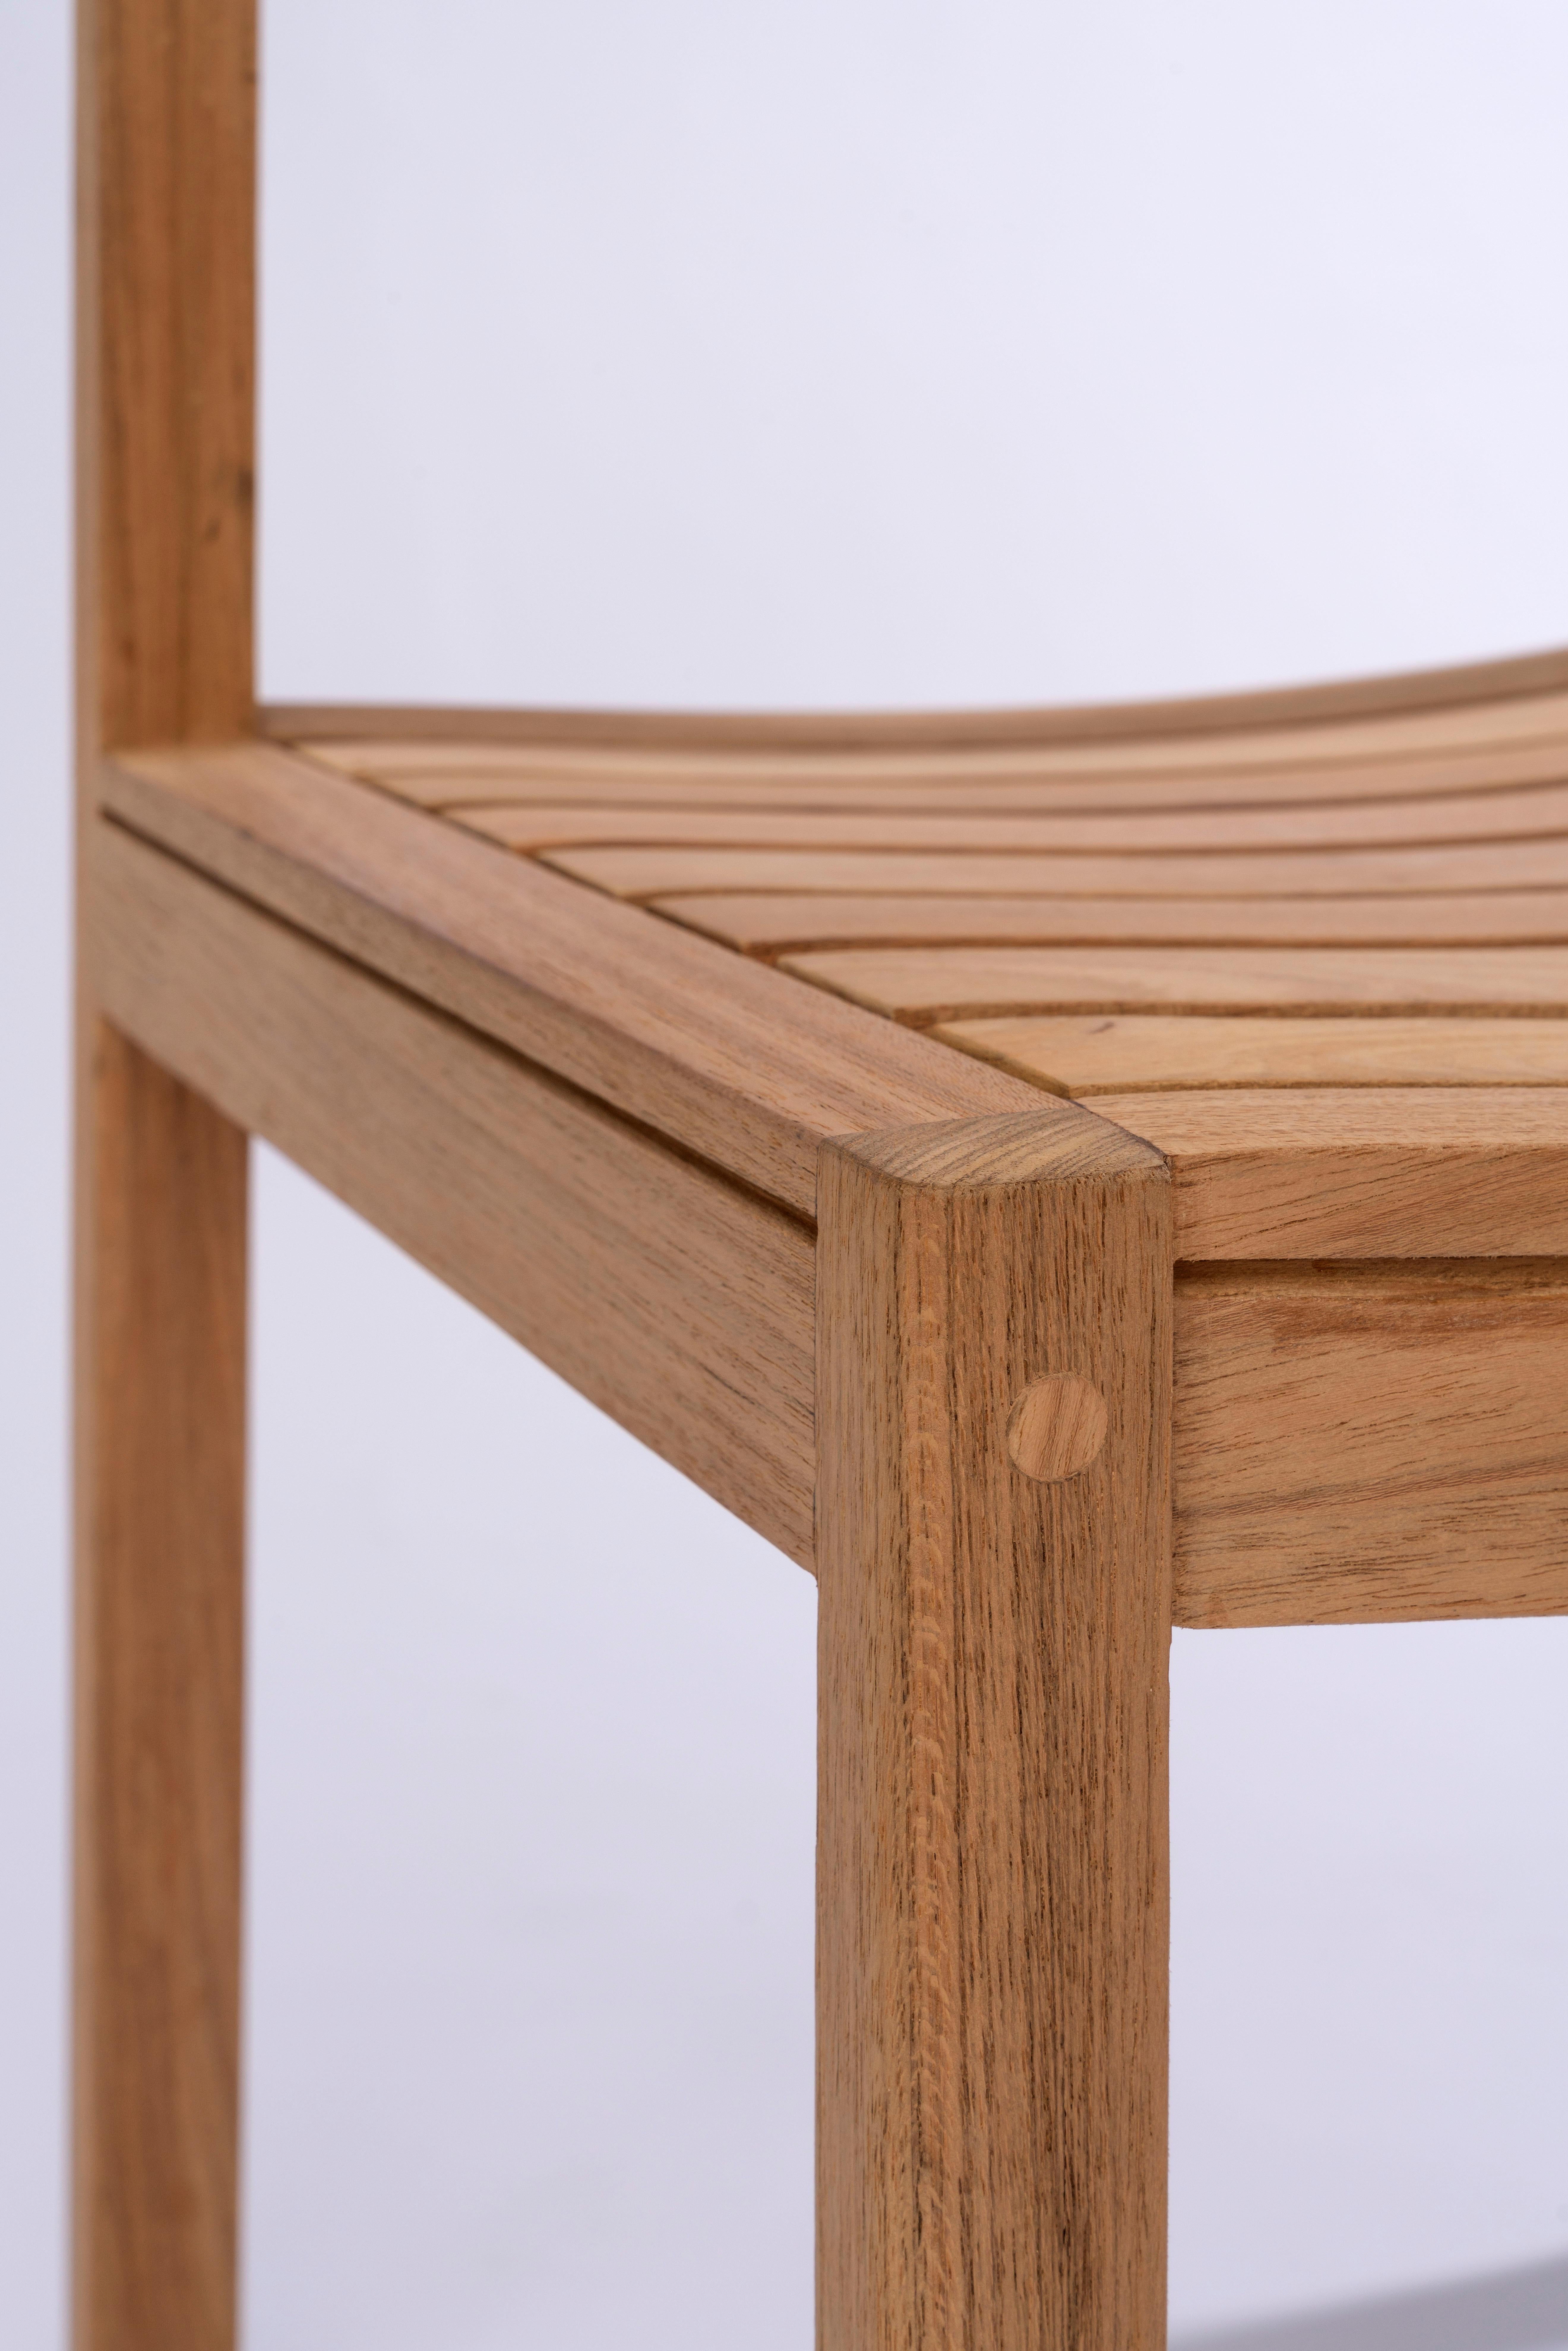 Contemporary Solid Wood Chair in Teak, with Wooden Slats, for the Outside, Outdoor Resistant  For Sale